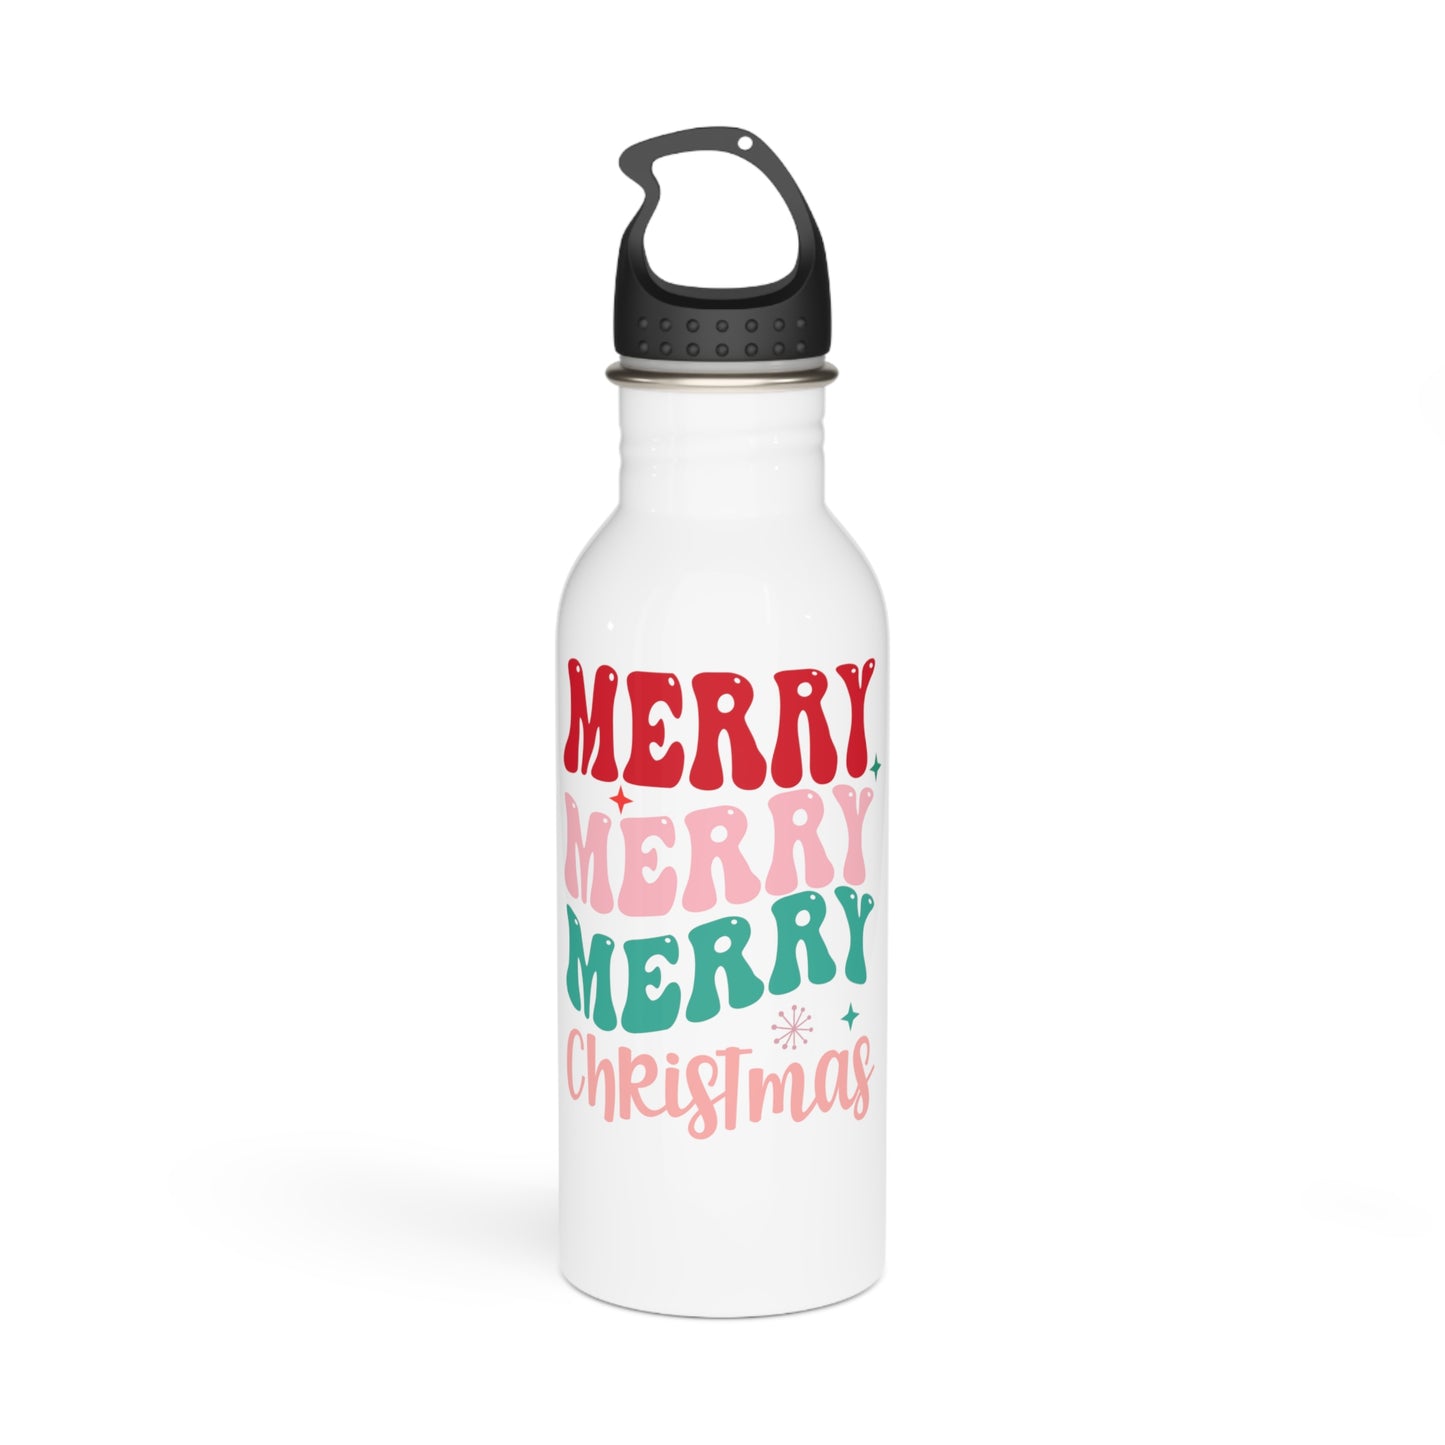 Merry Merry Christmas Stainless Steel Water Bottle